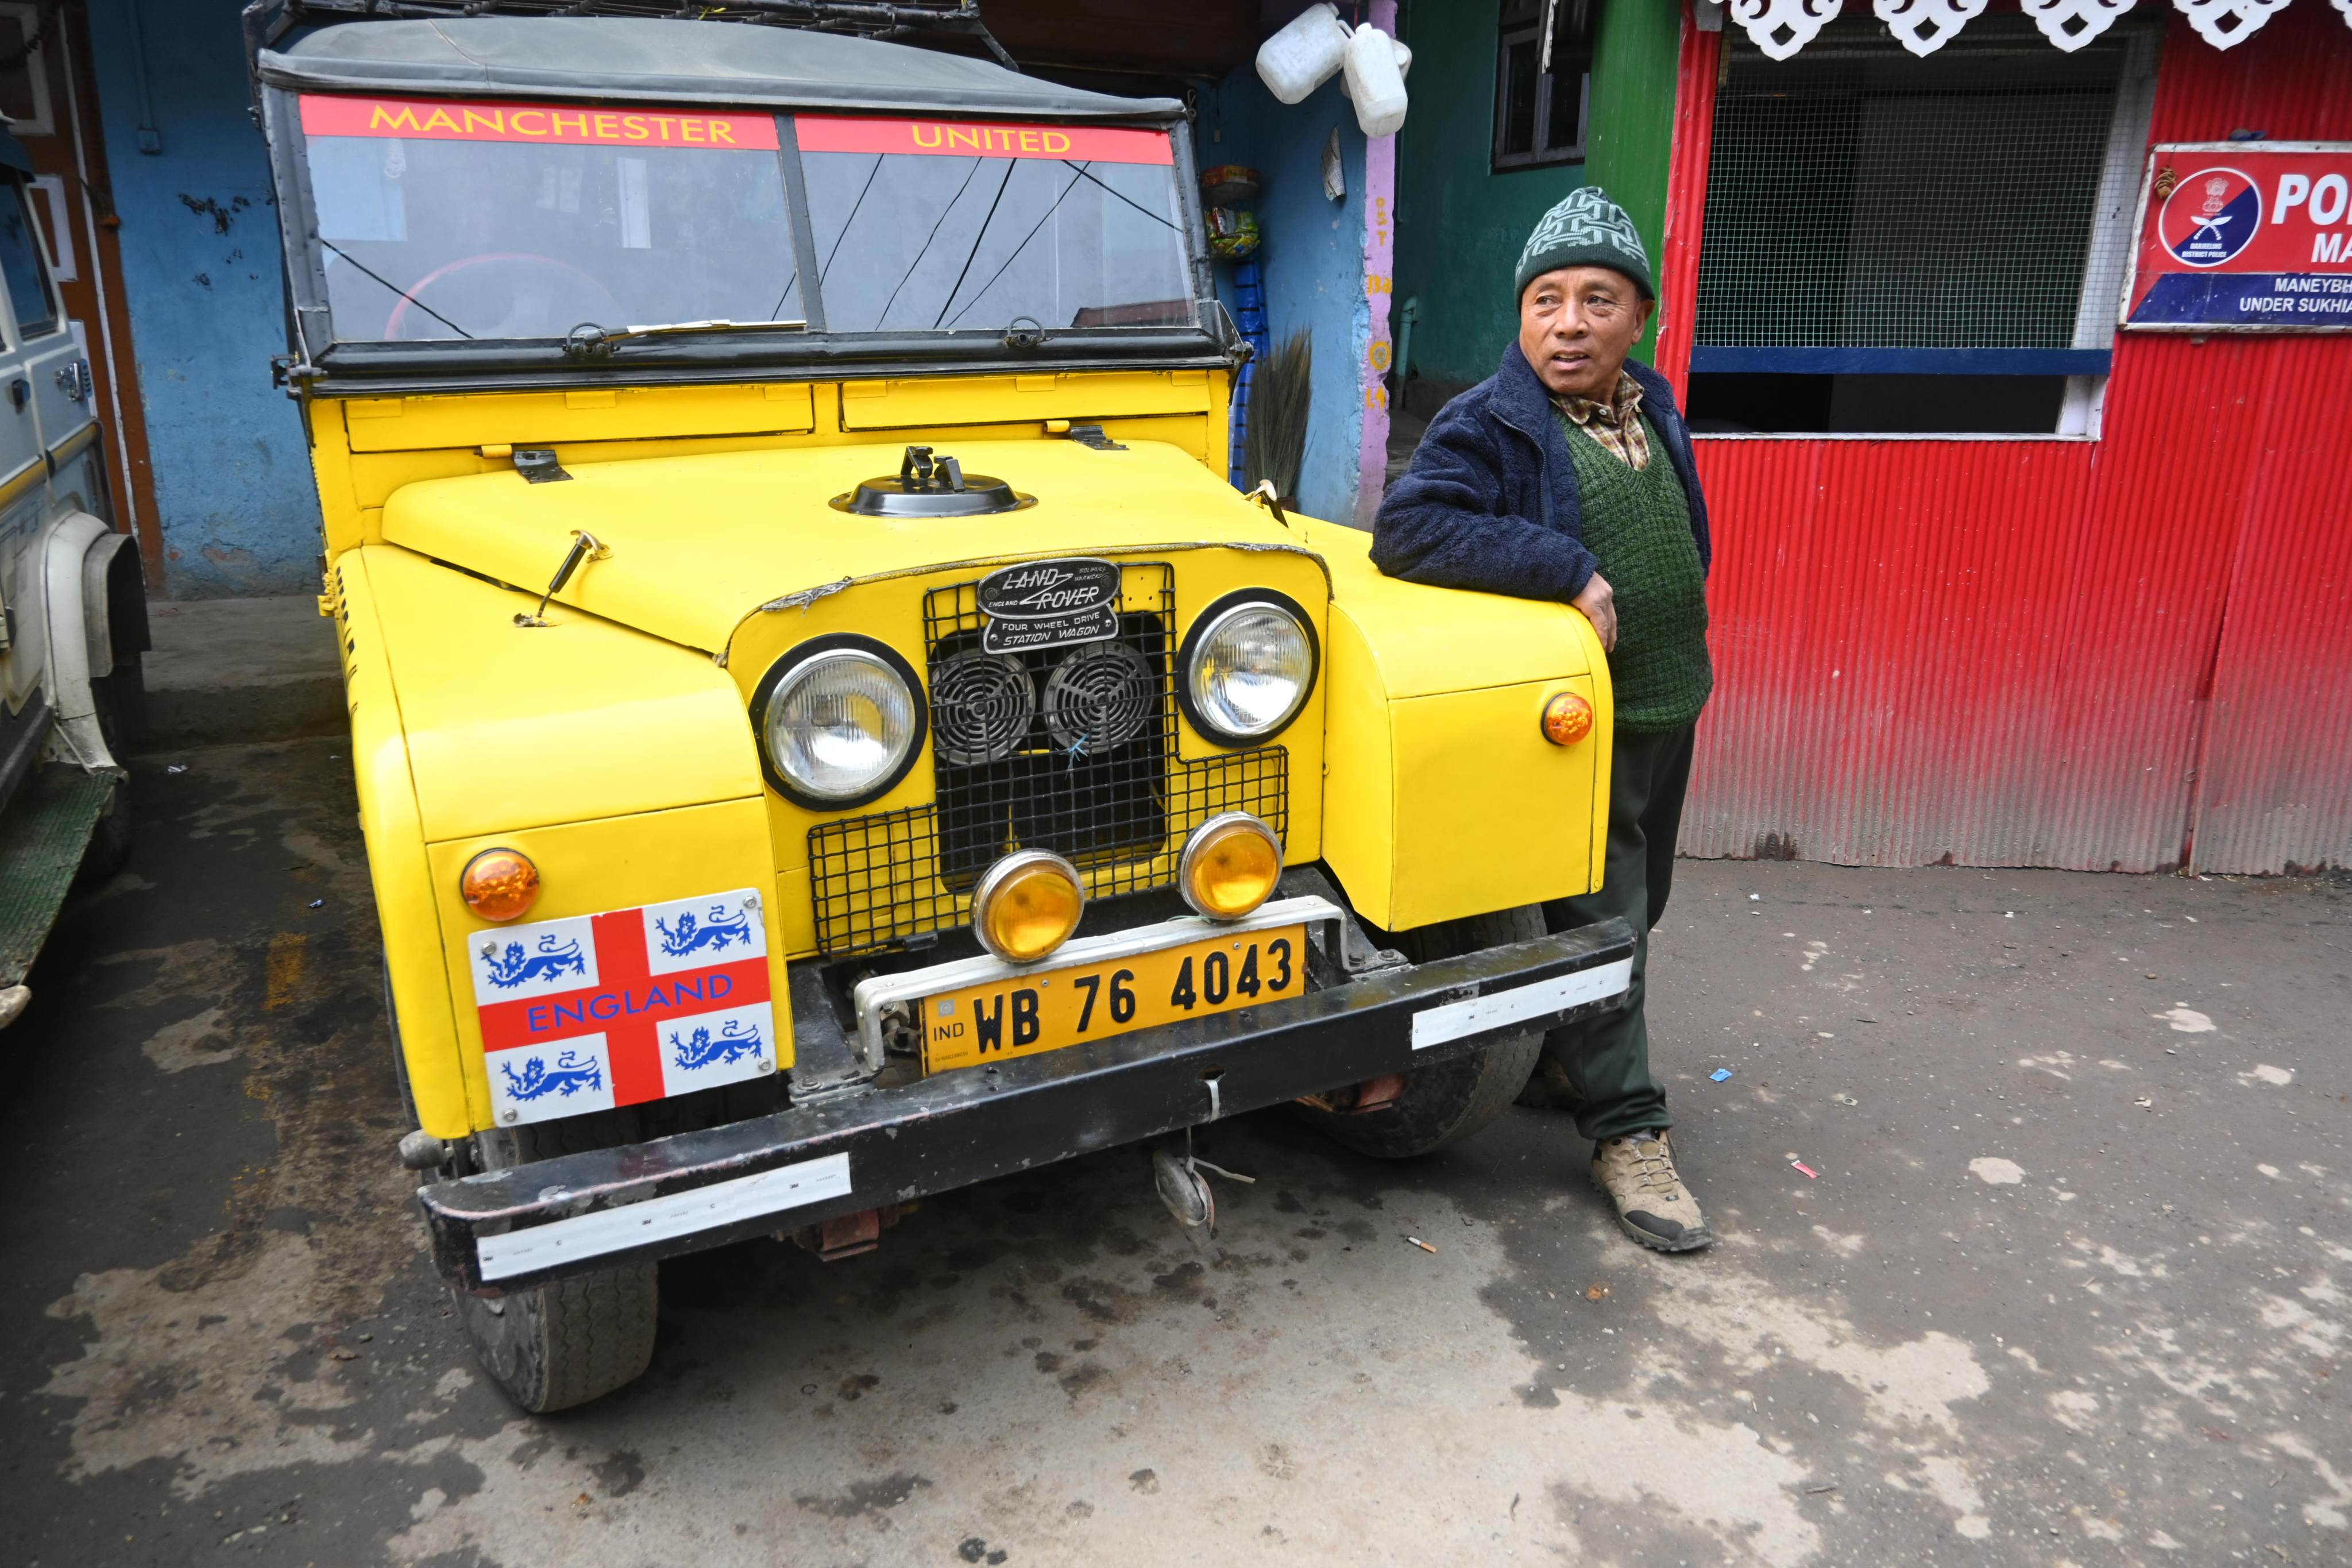 Pasang Tamang with his classic Land Rover in Manebhanjyang. The Indian town on the border with Nepal is home to many of the vintage vehicles, but owners face the possibility of their commercial use being phased out. Photo: Shail Desai